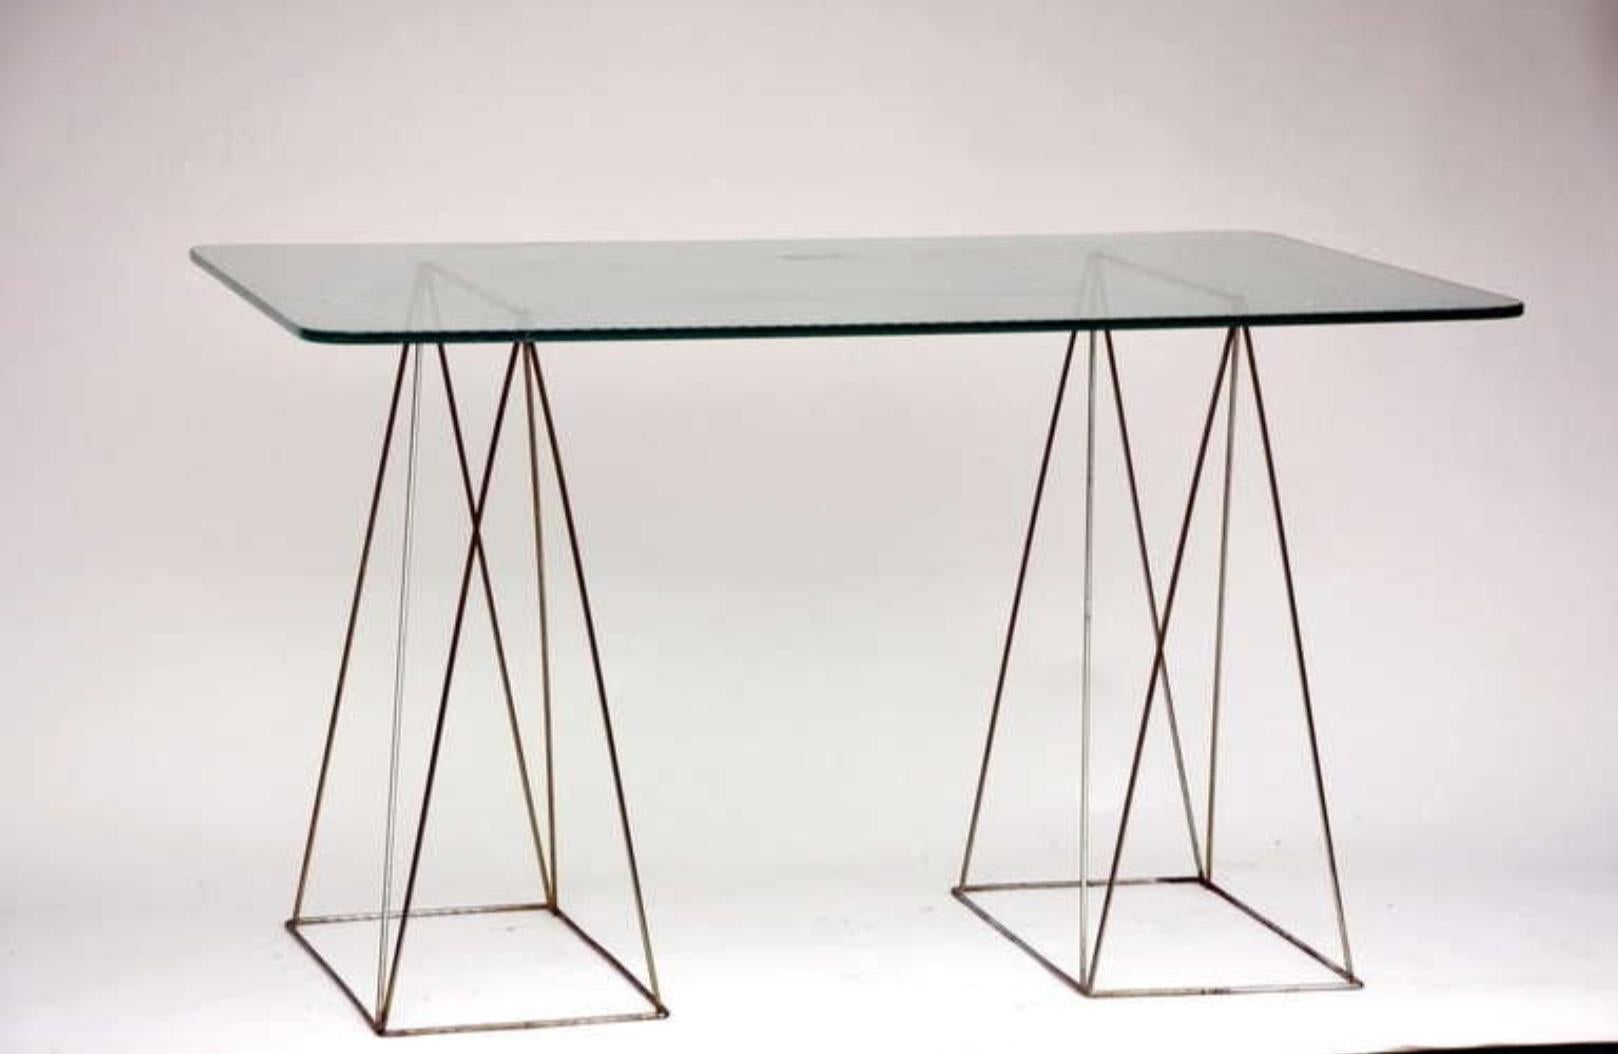 Minimalist Steel and Glass Trestle Table In Good Condition For Sale In Los Angeles, CA